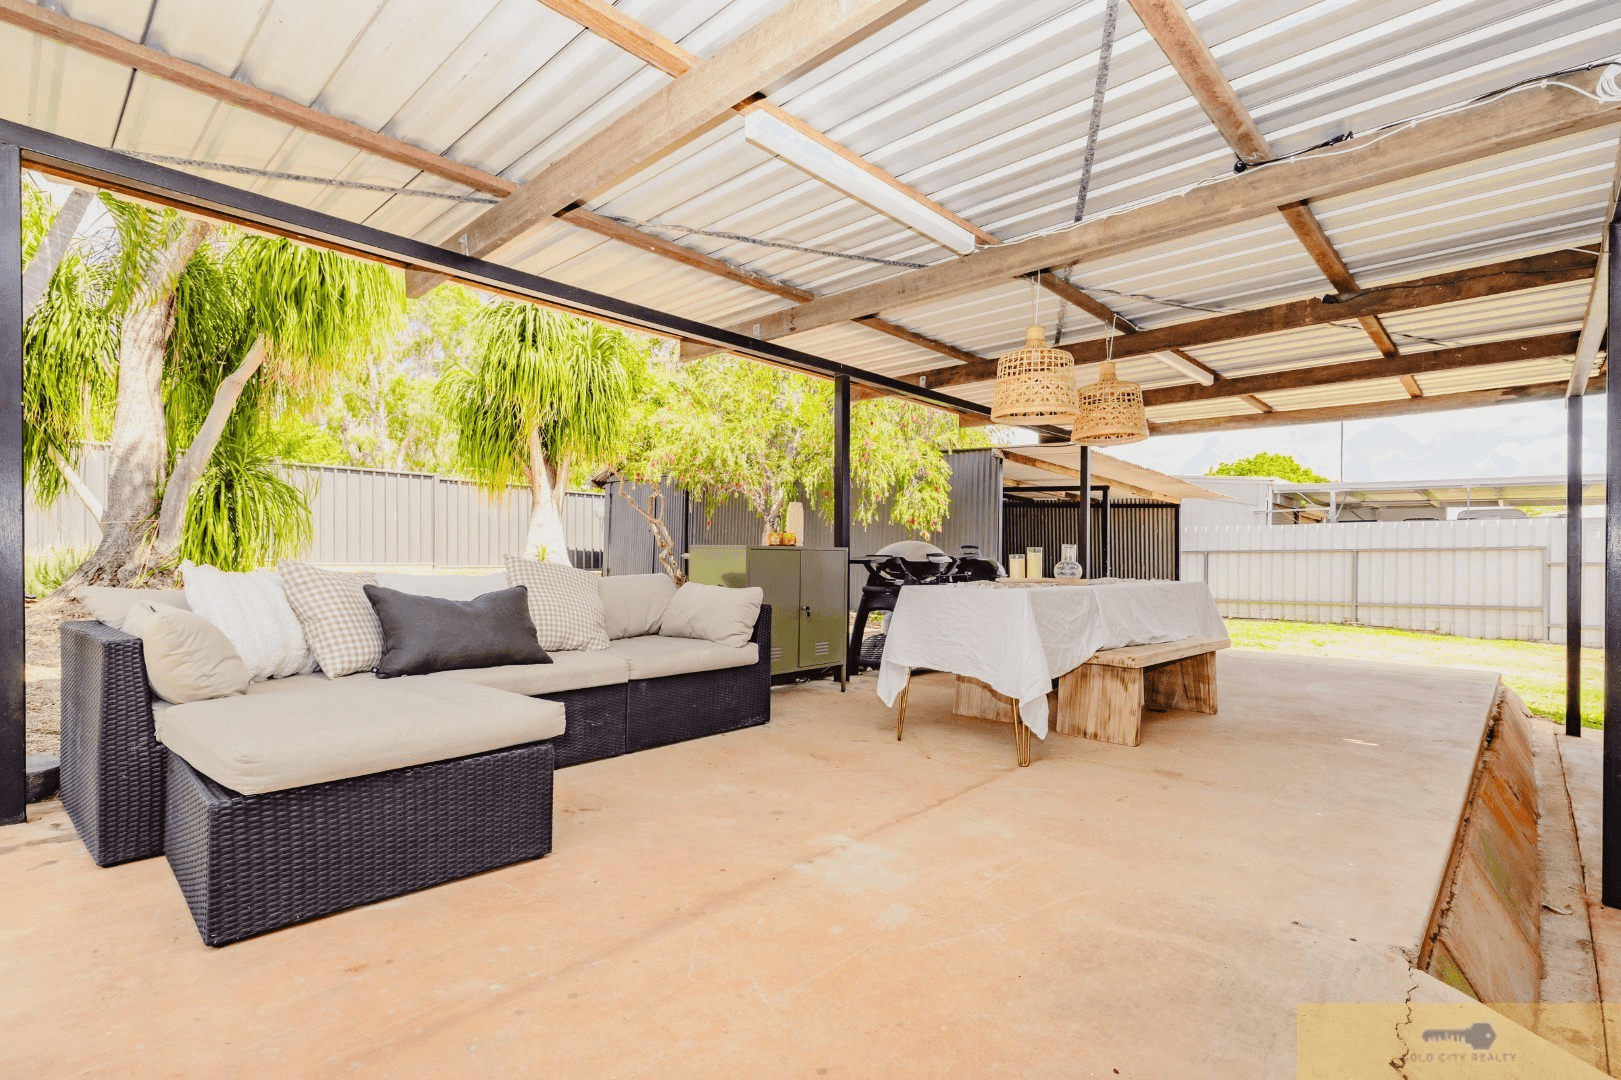 32 King Street, Charters Towers City, QLD 4820